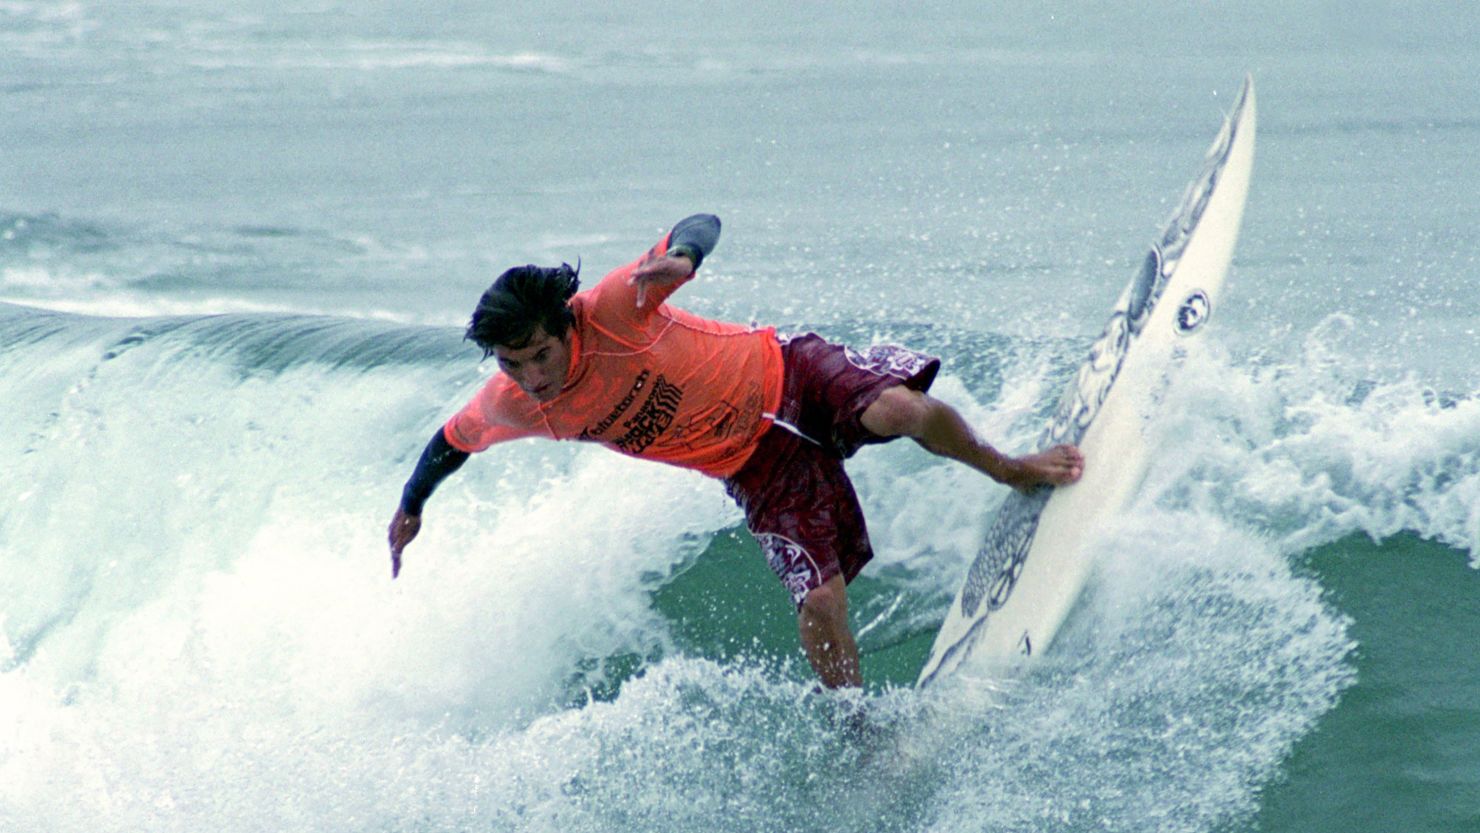 Mikala Jones was known for his surfing photos and videography, offering a unique lens into the sport. 